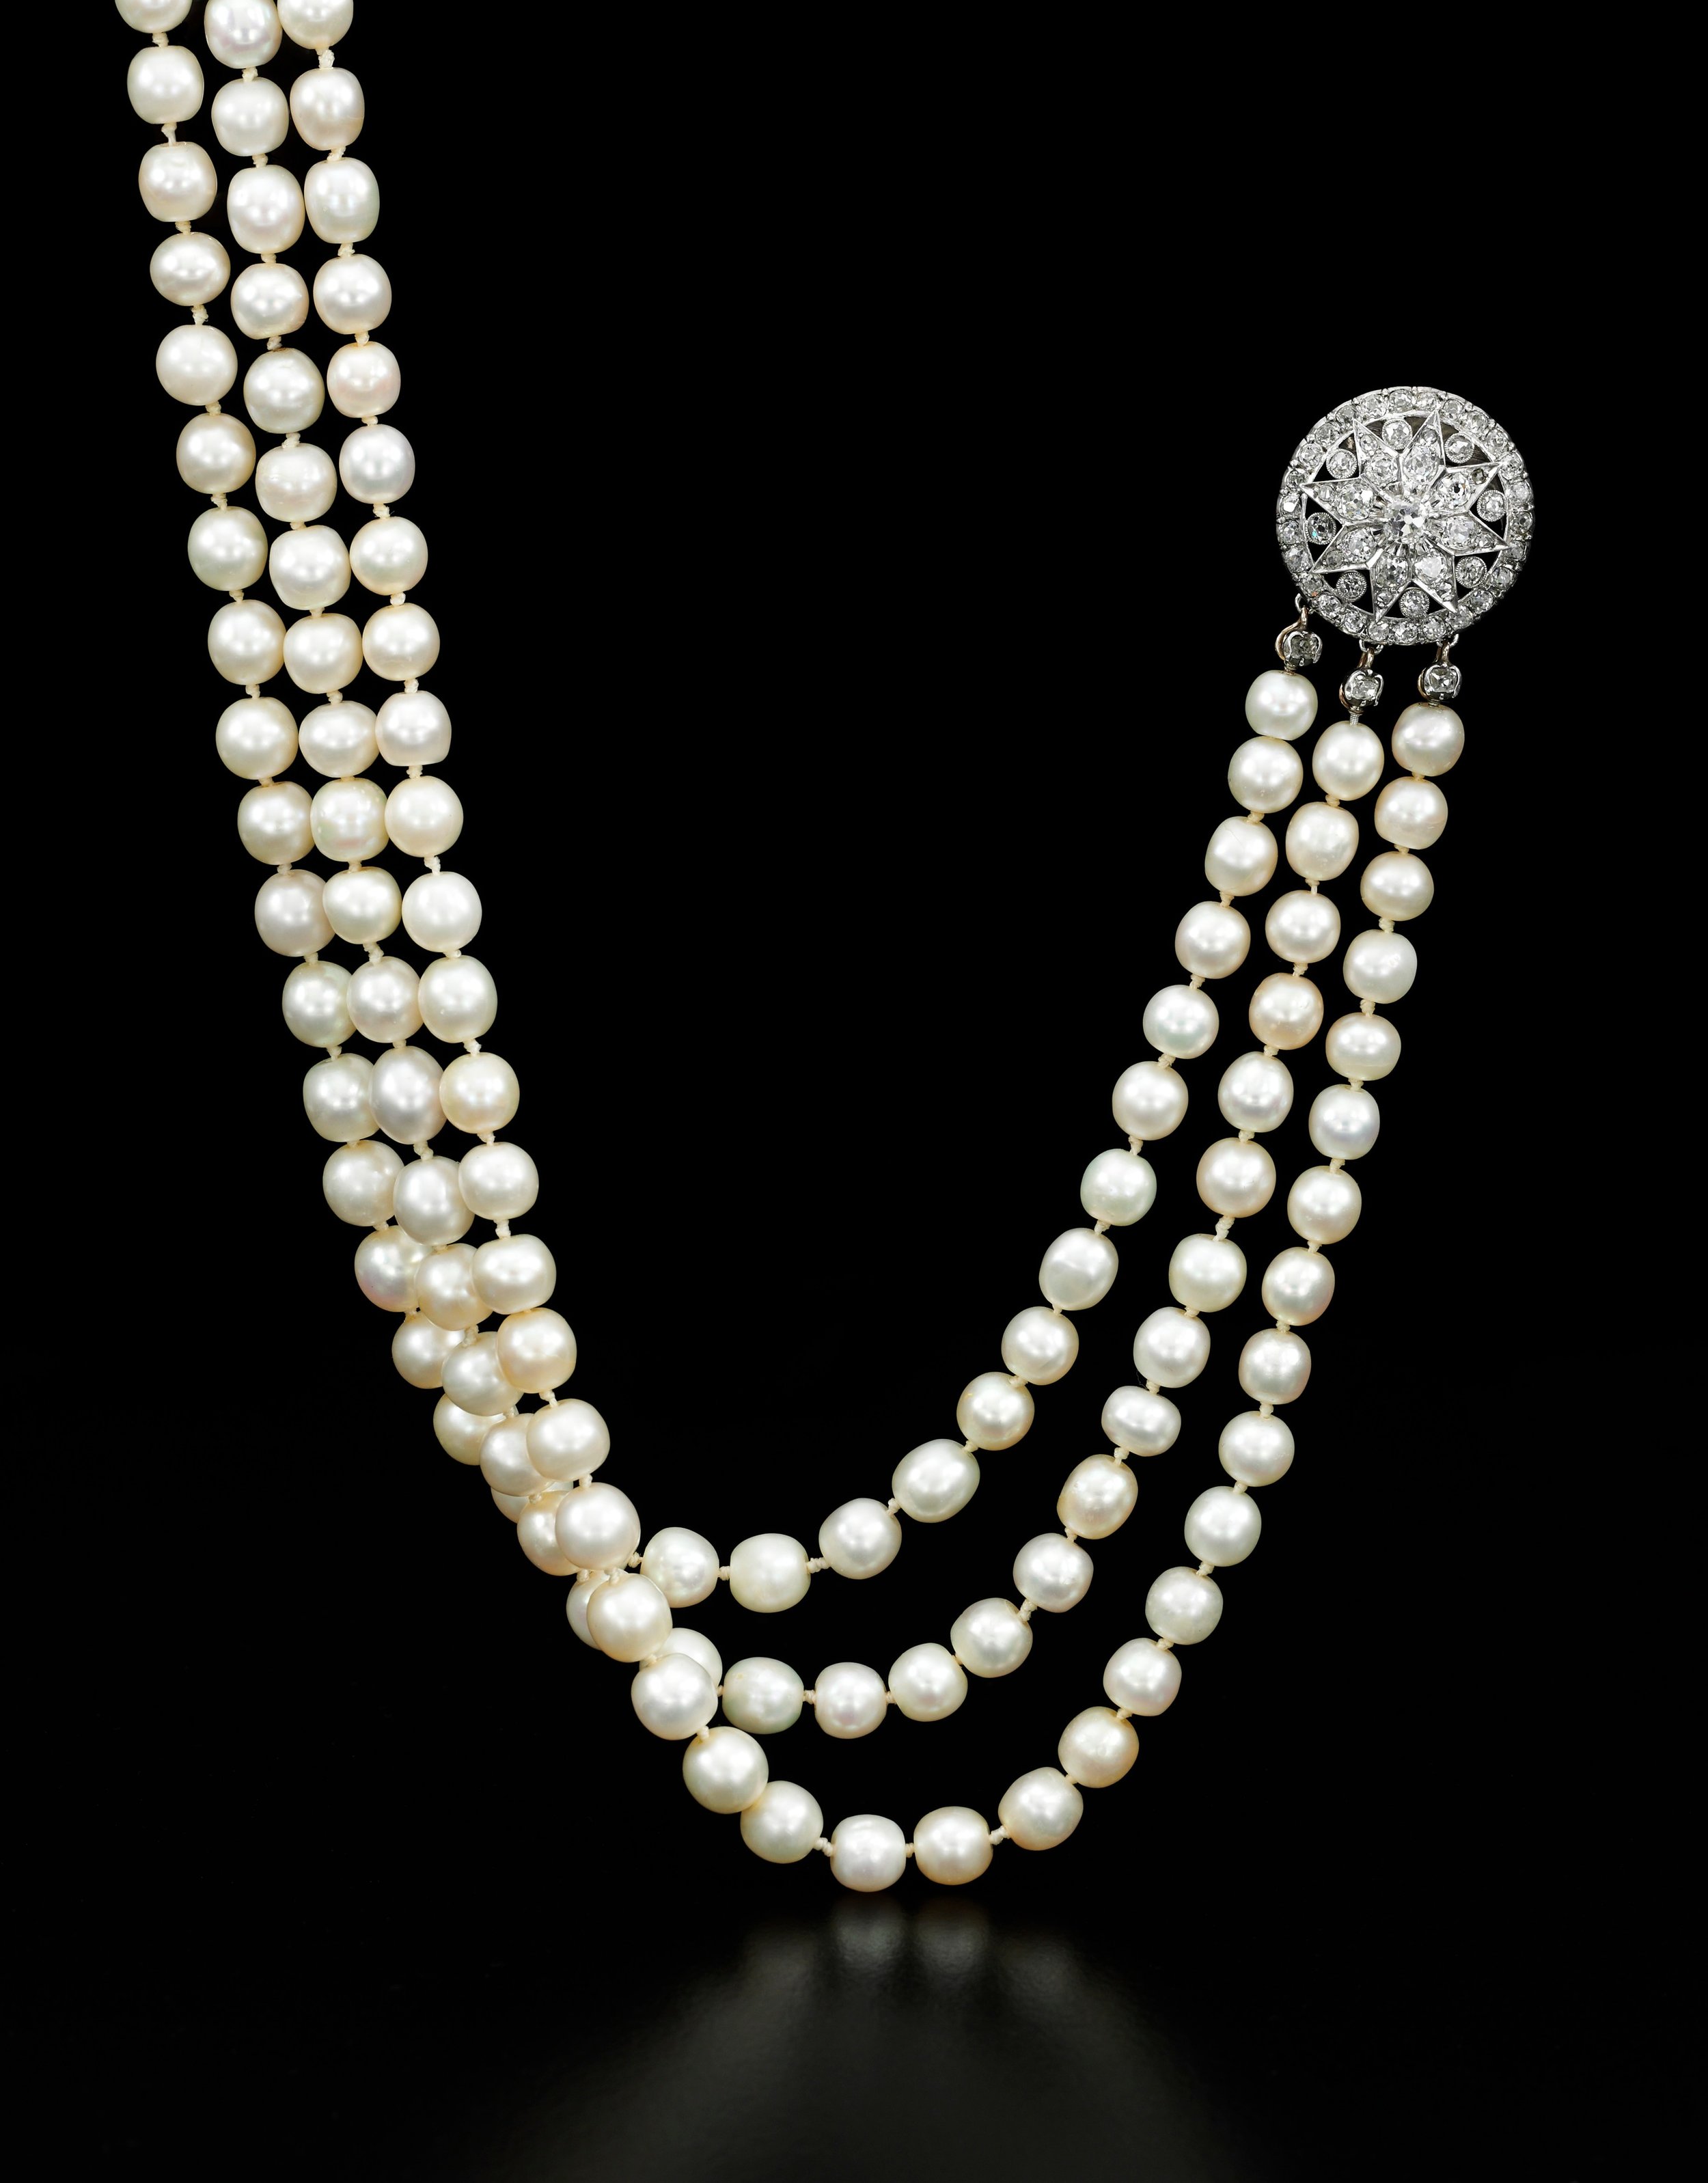 Important natural pearl and diamond necklace - on black - Royal Jewels from the Bourbon Parma Family - Sotheby's 14 November 2018.jpg